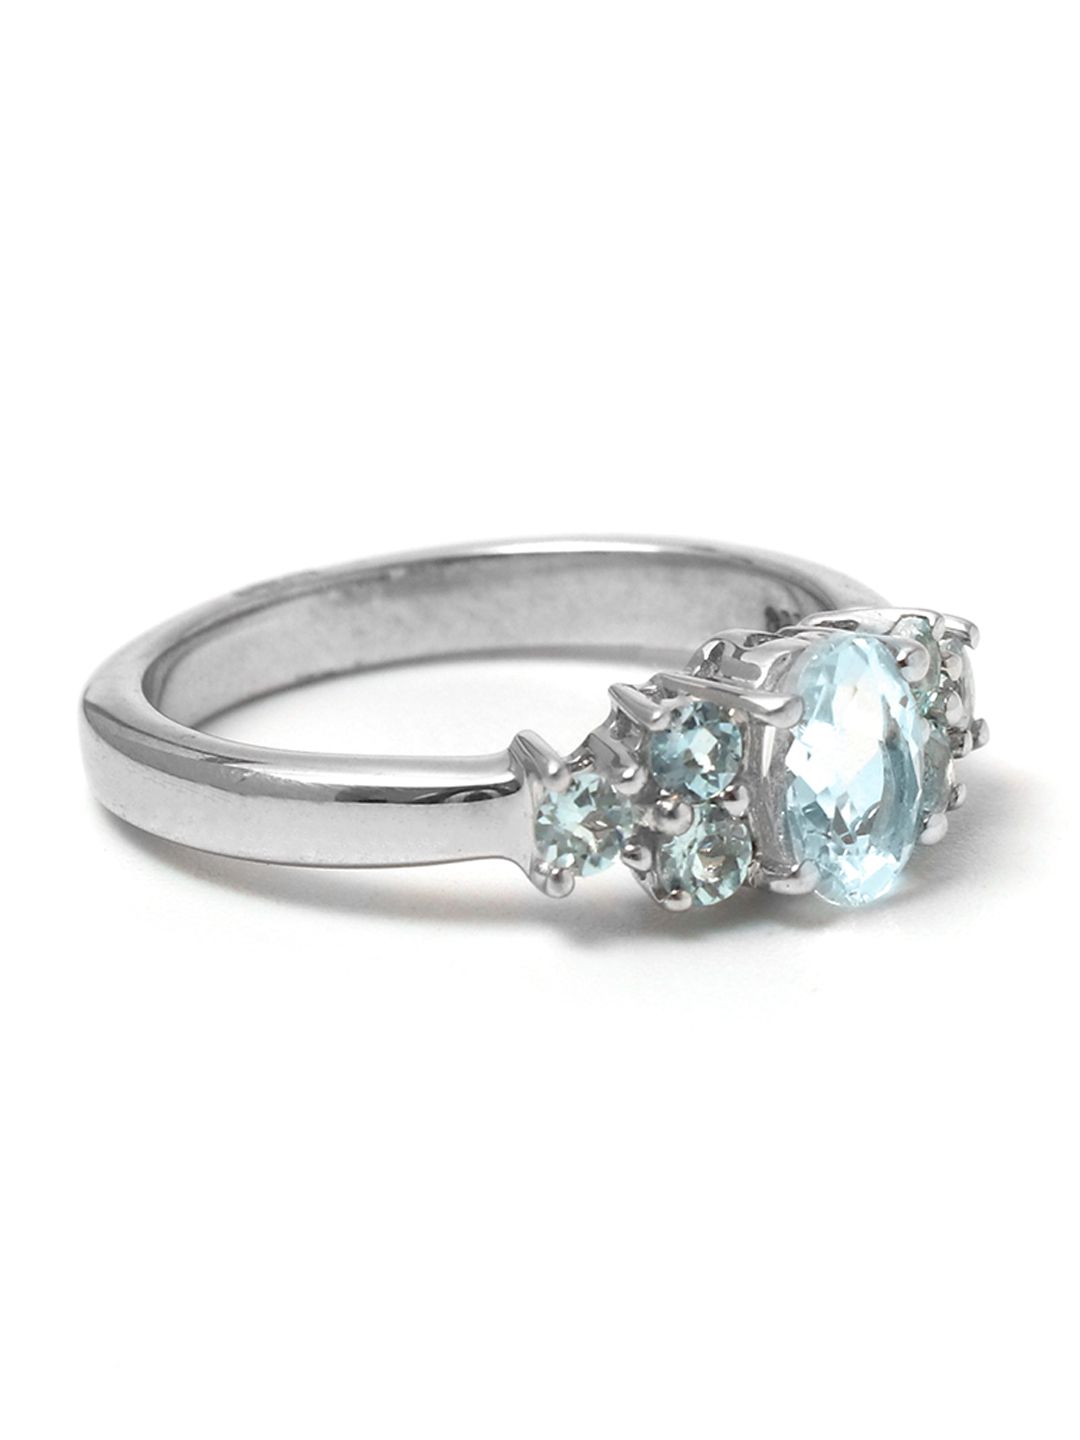 HIFLYER JEWELS Rhodium-Plated & Silver-Toned White Topaz Studded Finger Ring Price in India